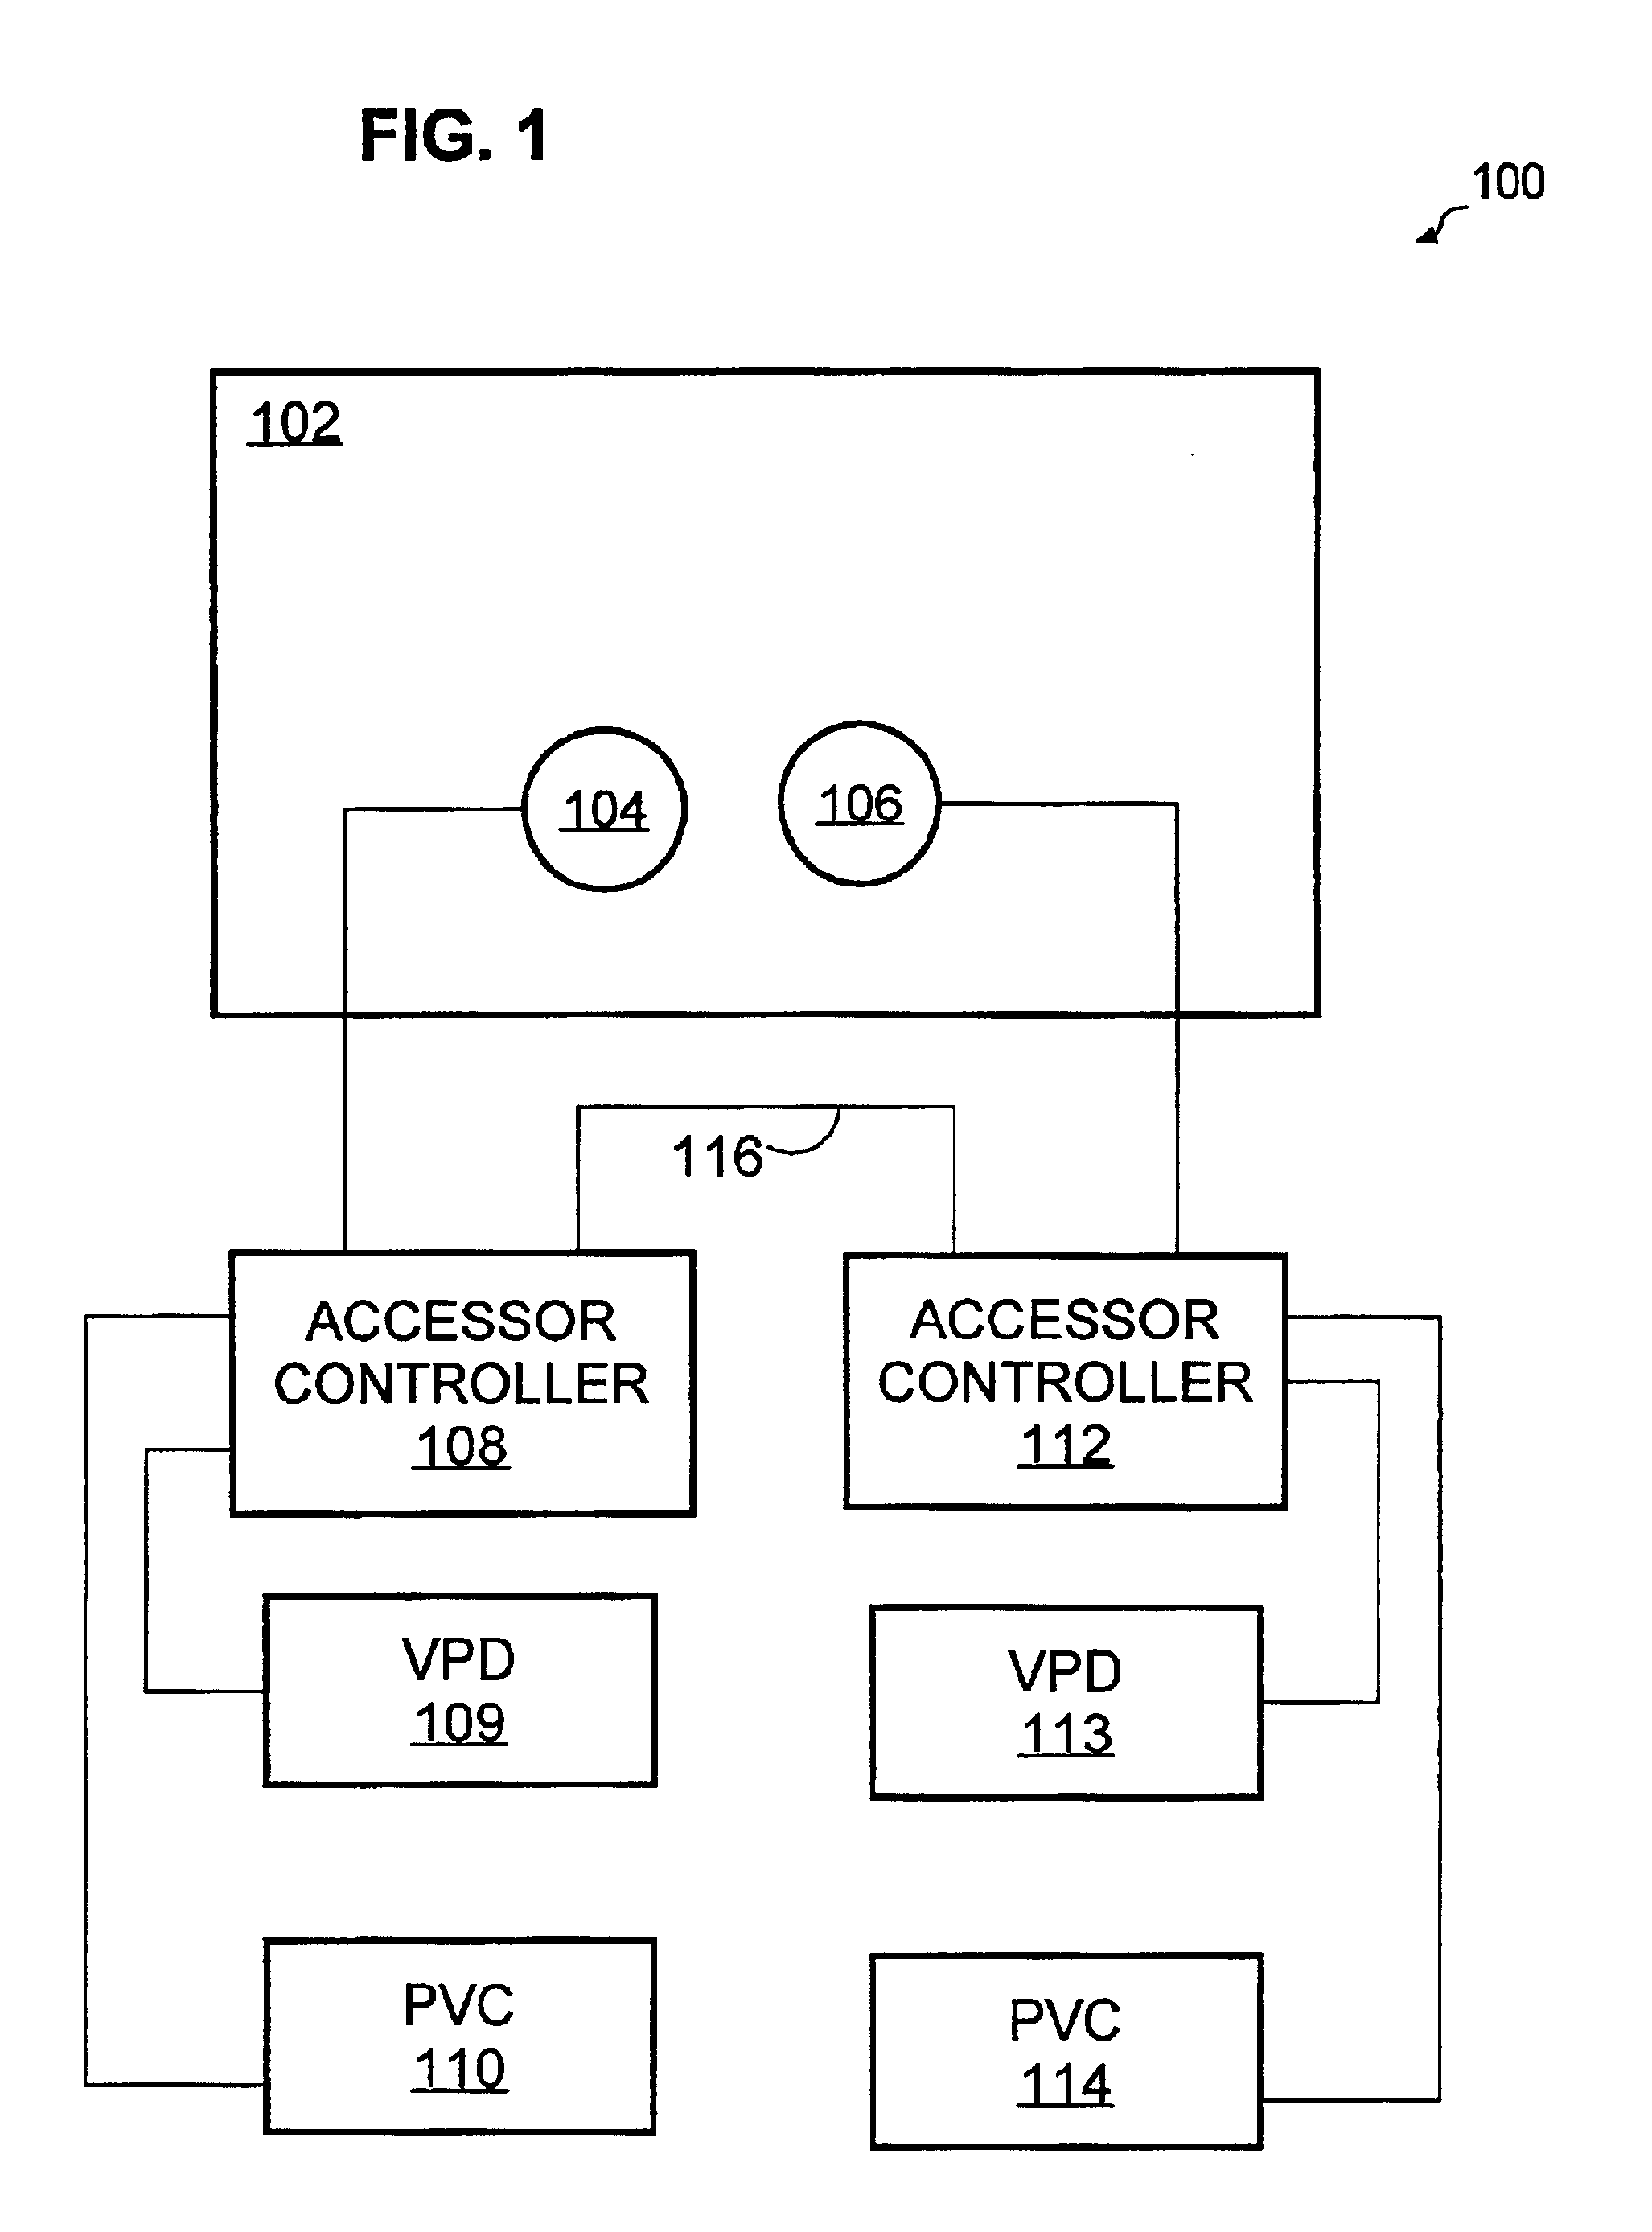 Method for maintaining consistent dual copies of vital product data in a dual accessor library of portable data storage media